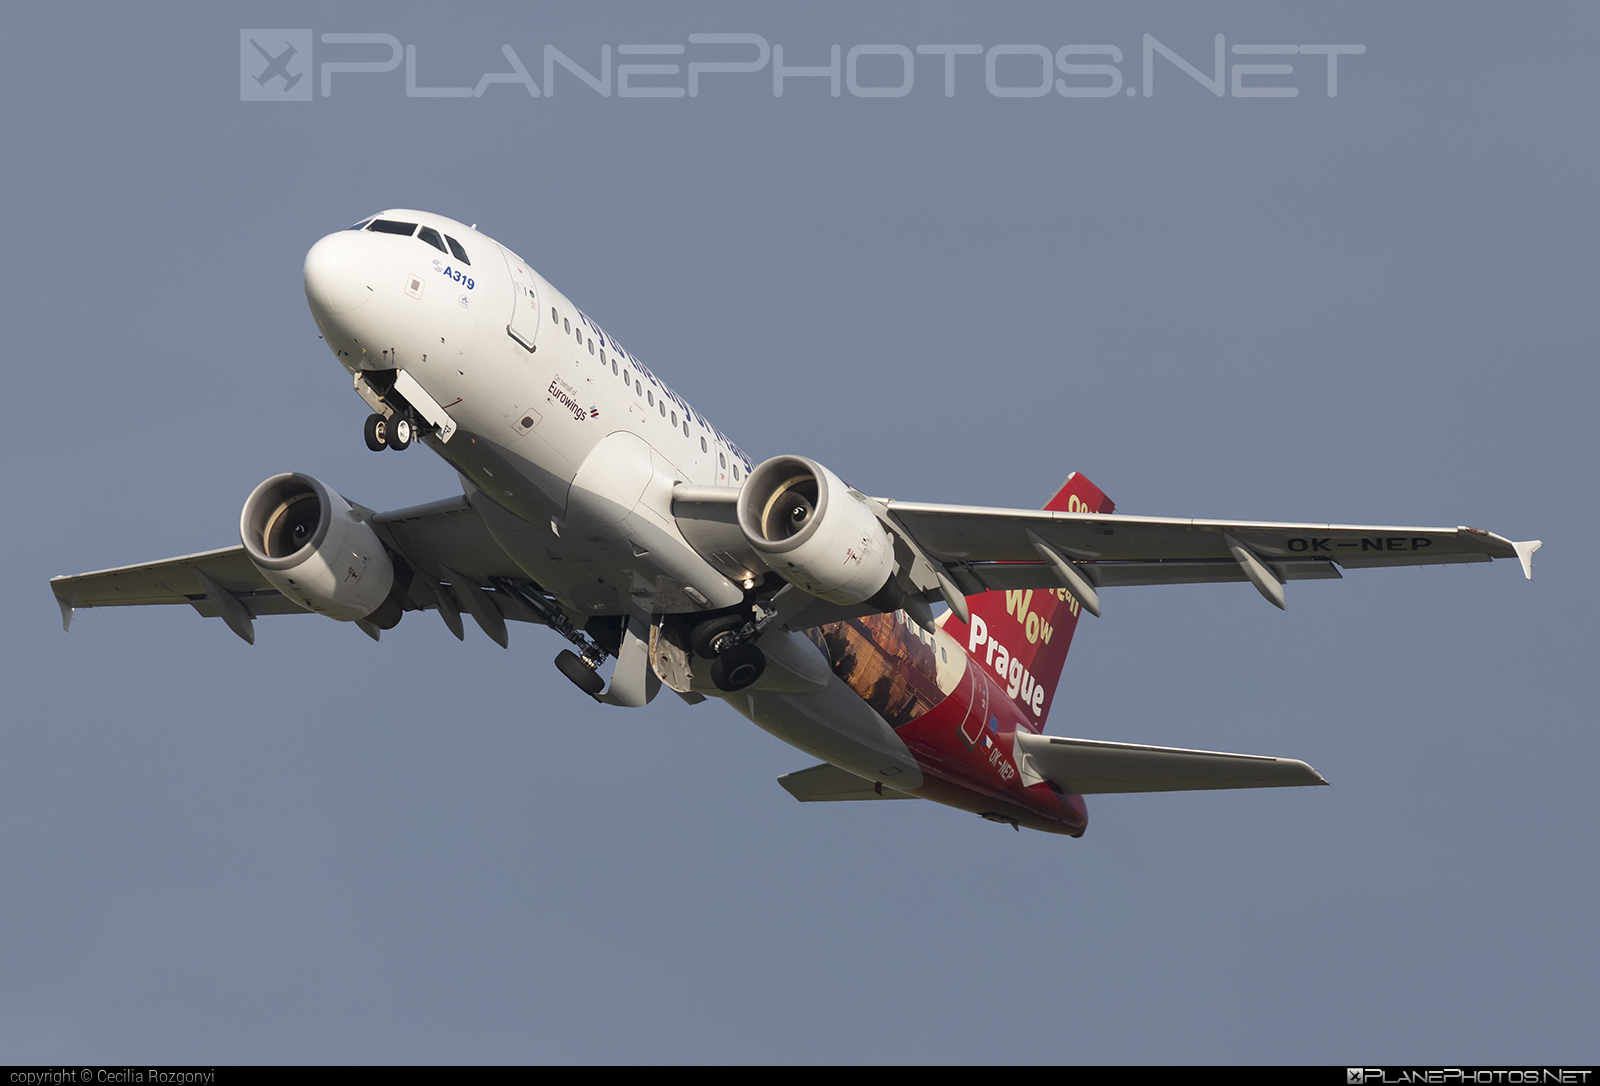 Airbus A319-112 - OK-NEP operated by Eurowings #a319 #a320family #airbus #airbus319 #eurowings